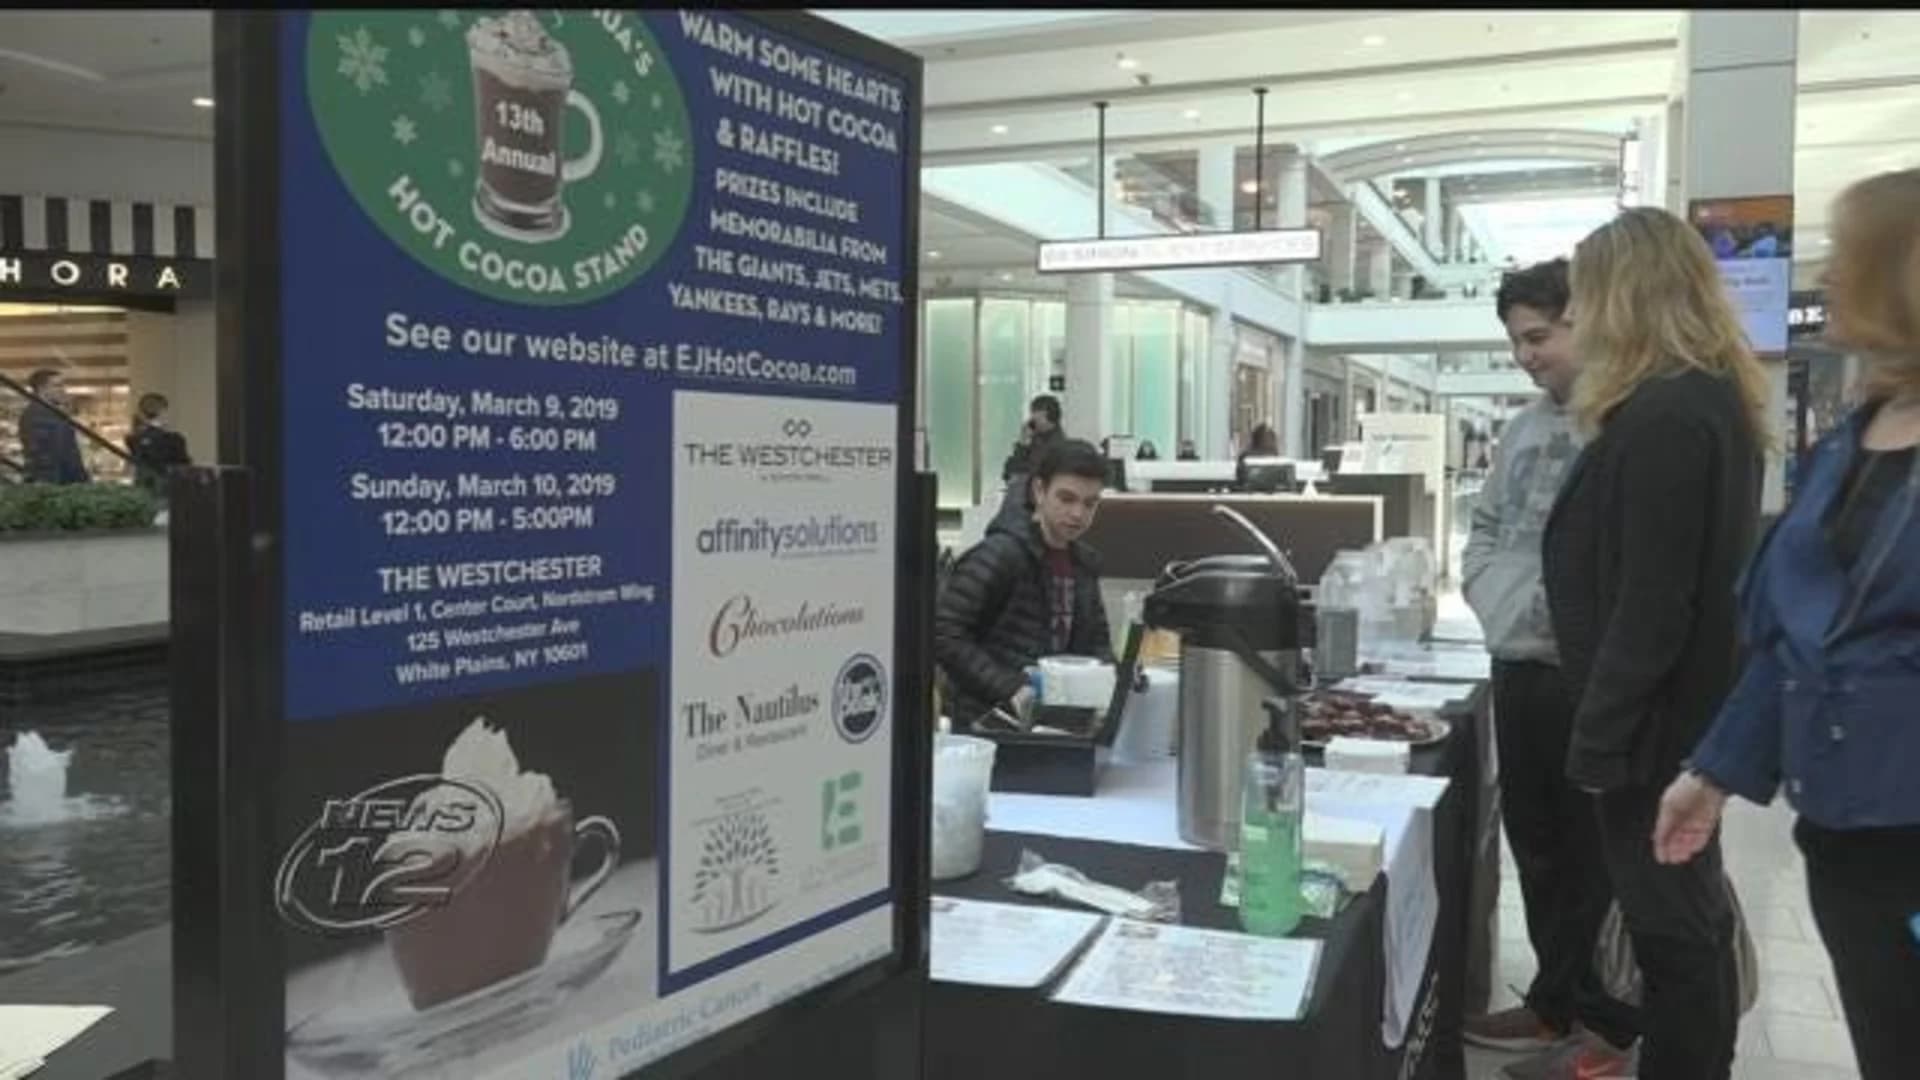 2 brothers sell hot chocolate for childhood cancer research